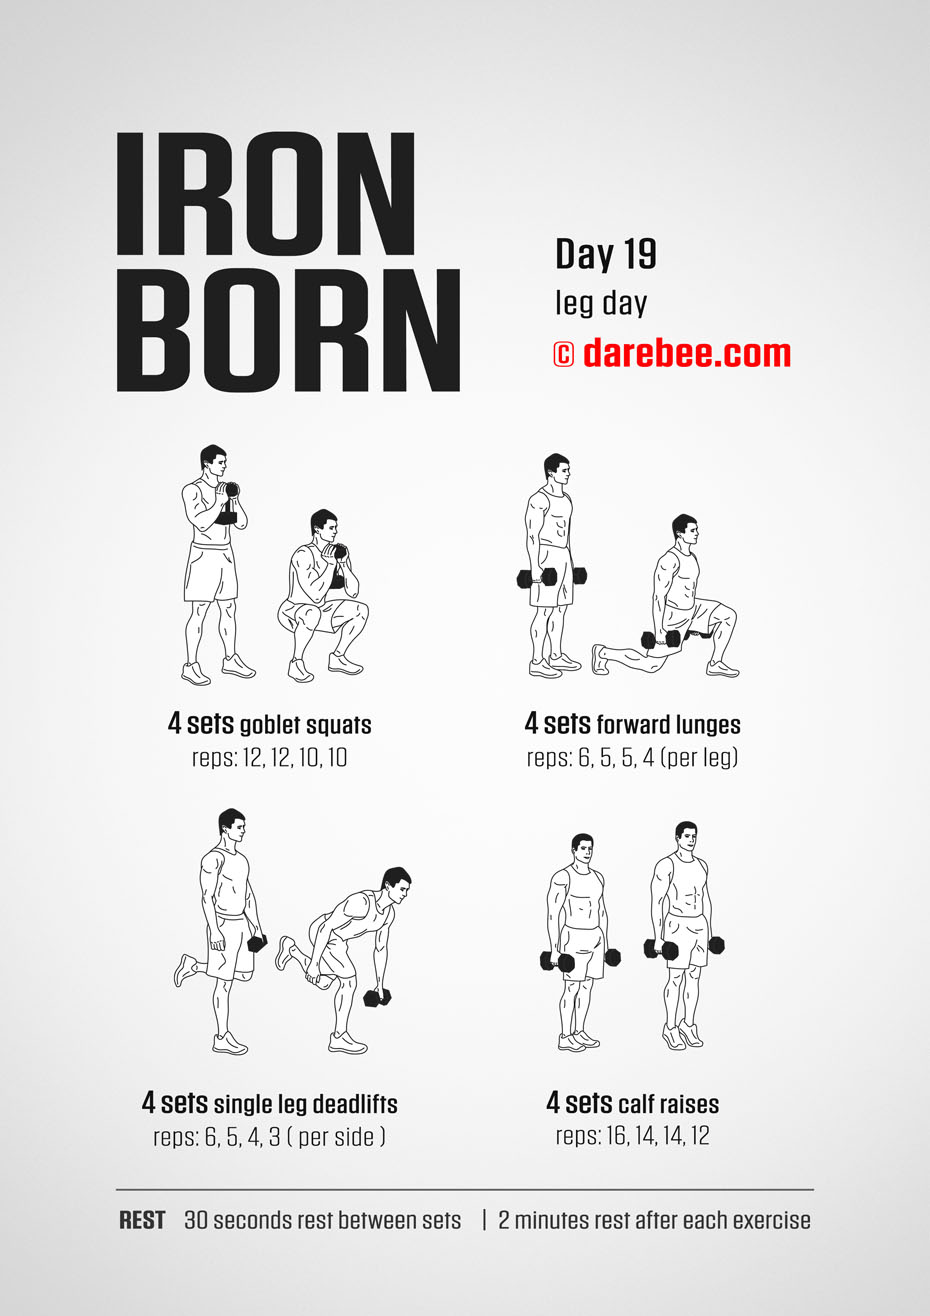 IRONBORN - 30 Day Muscle Definition Dumbbell Program by DAREBEE